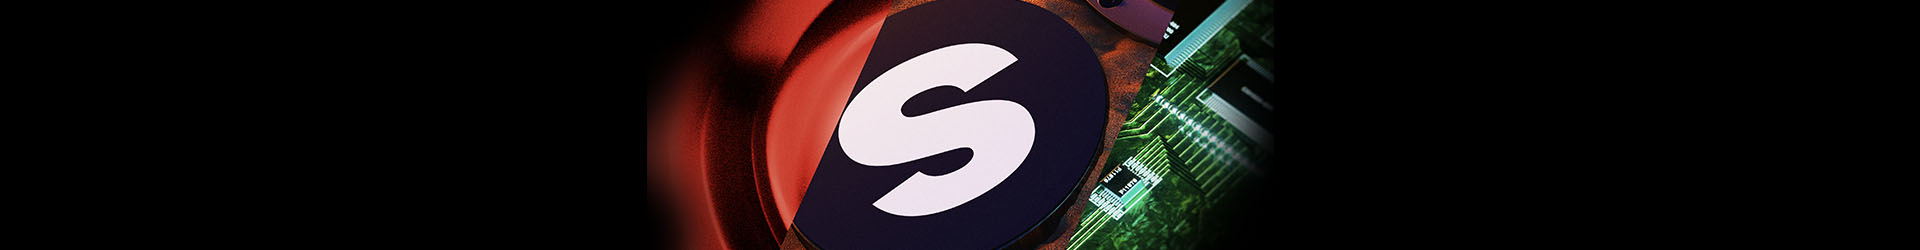 LIGHTS, BEAT, ACTION! GET THE SPINNIN' SOUNDS YOU NEED ON SPLICE TODAY!